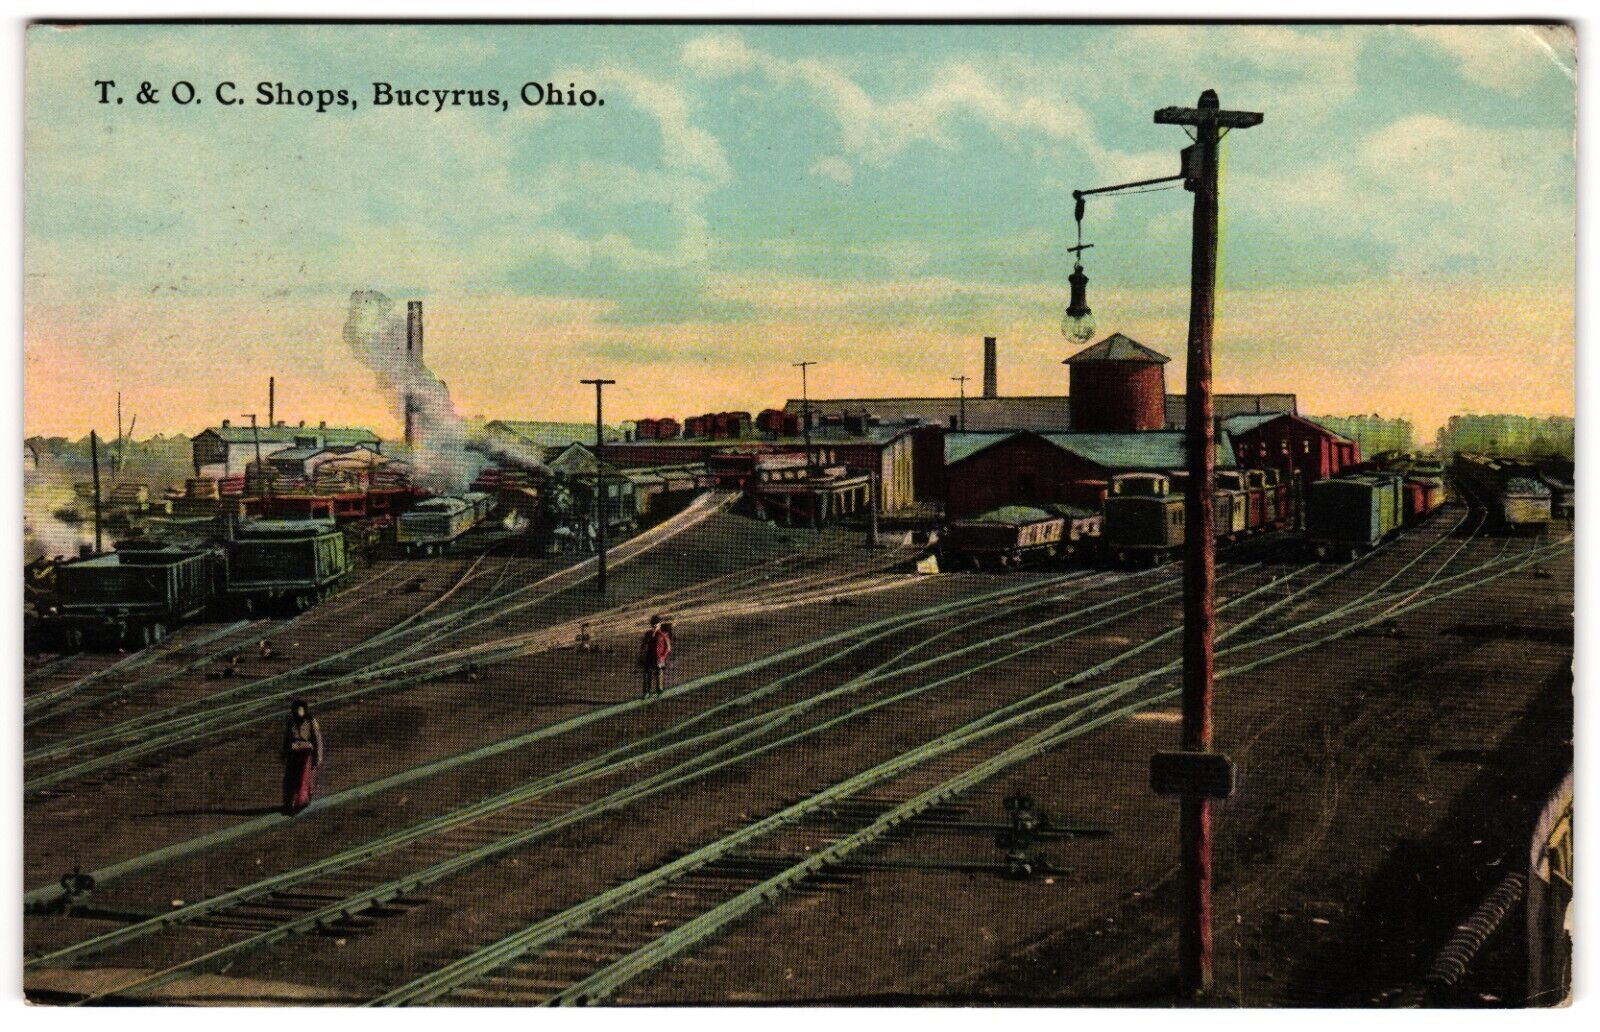 Toledo and Ohio Central Railroad Shops & Yards T.&O.C c1900s Bucyrus OH Postcard